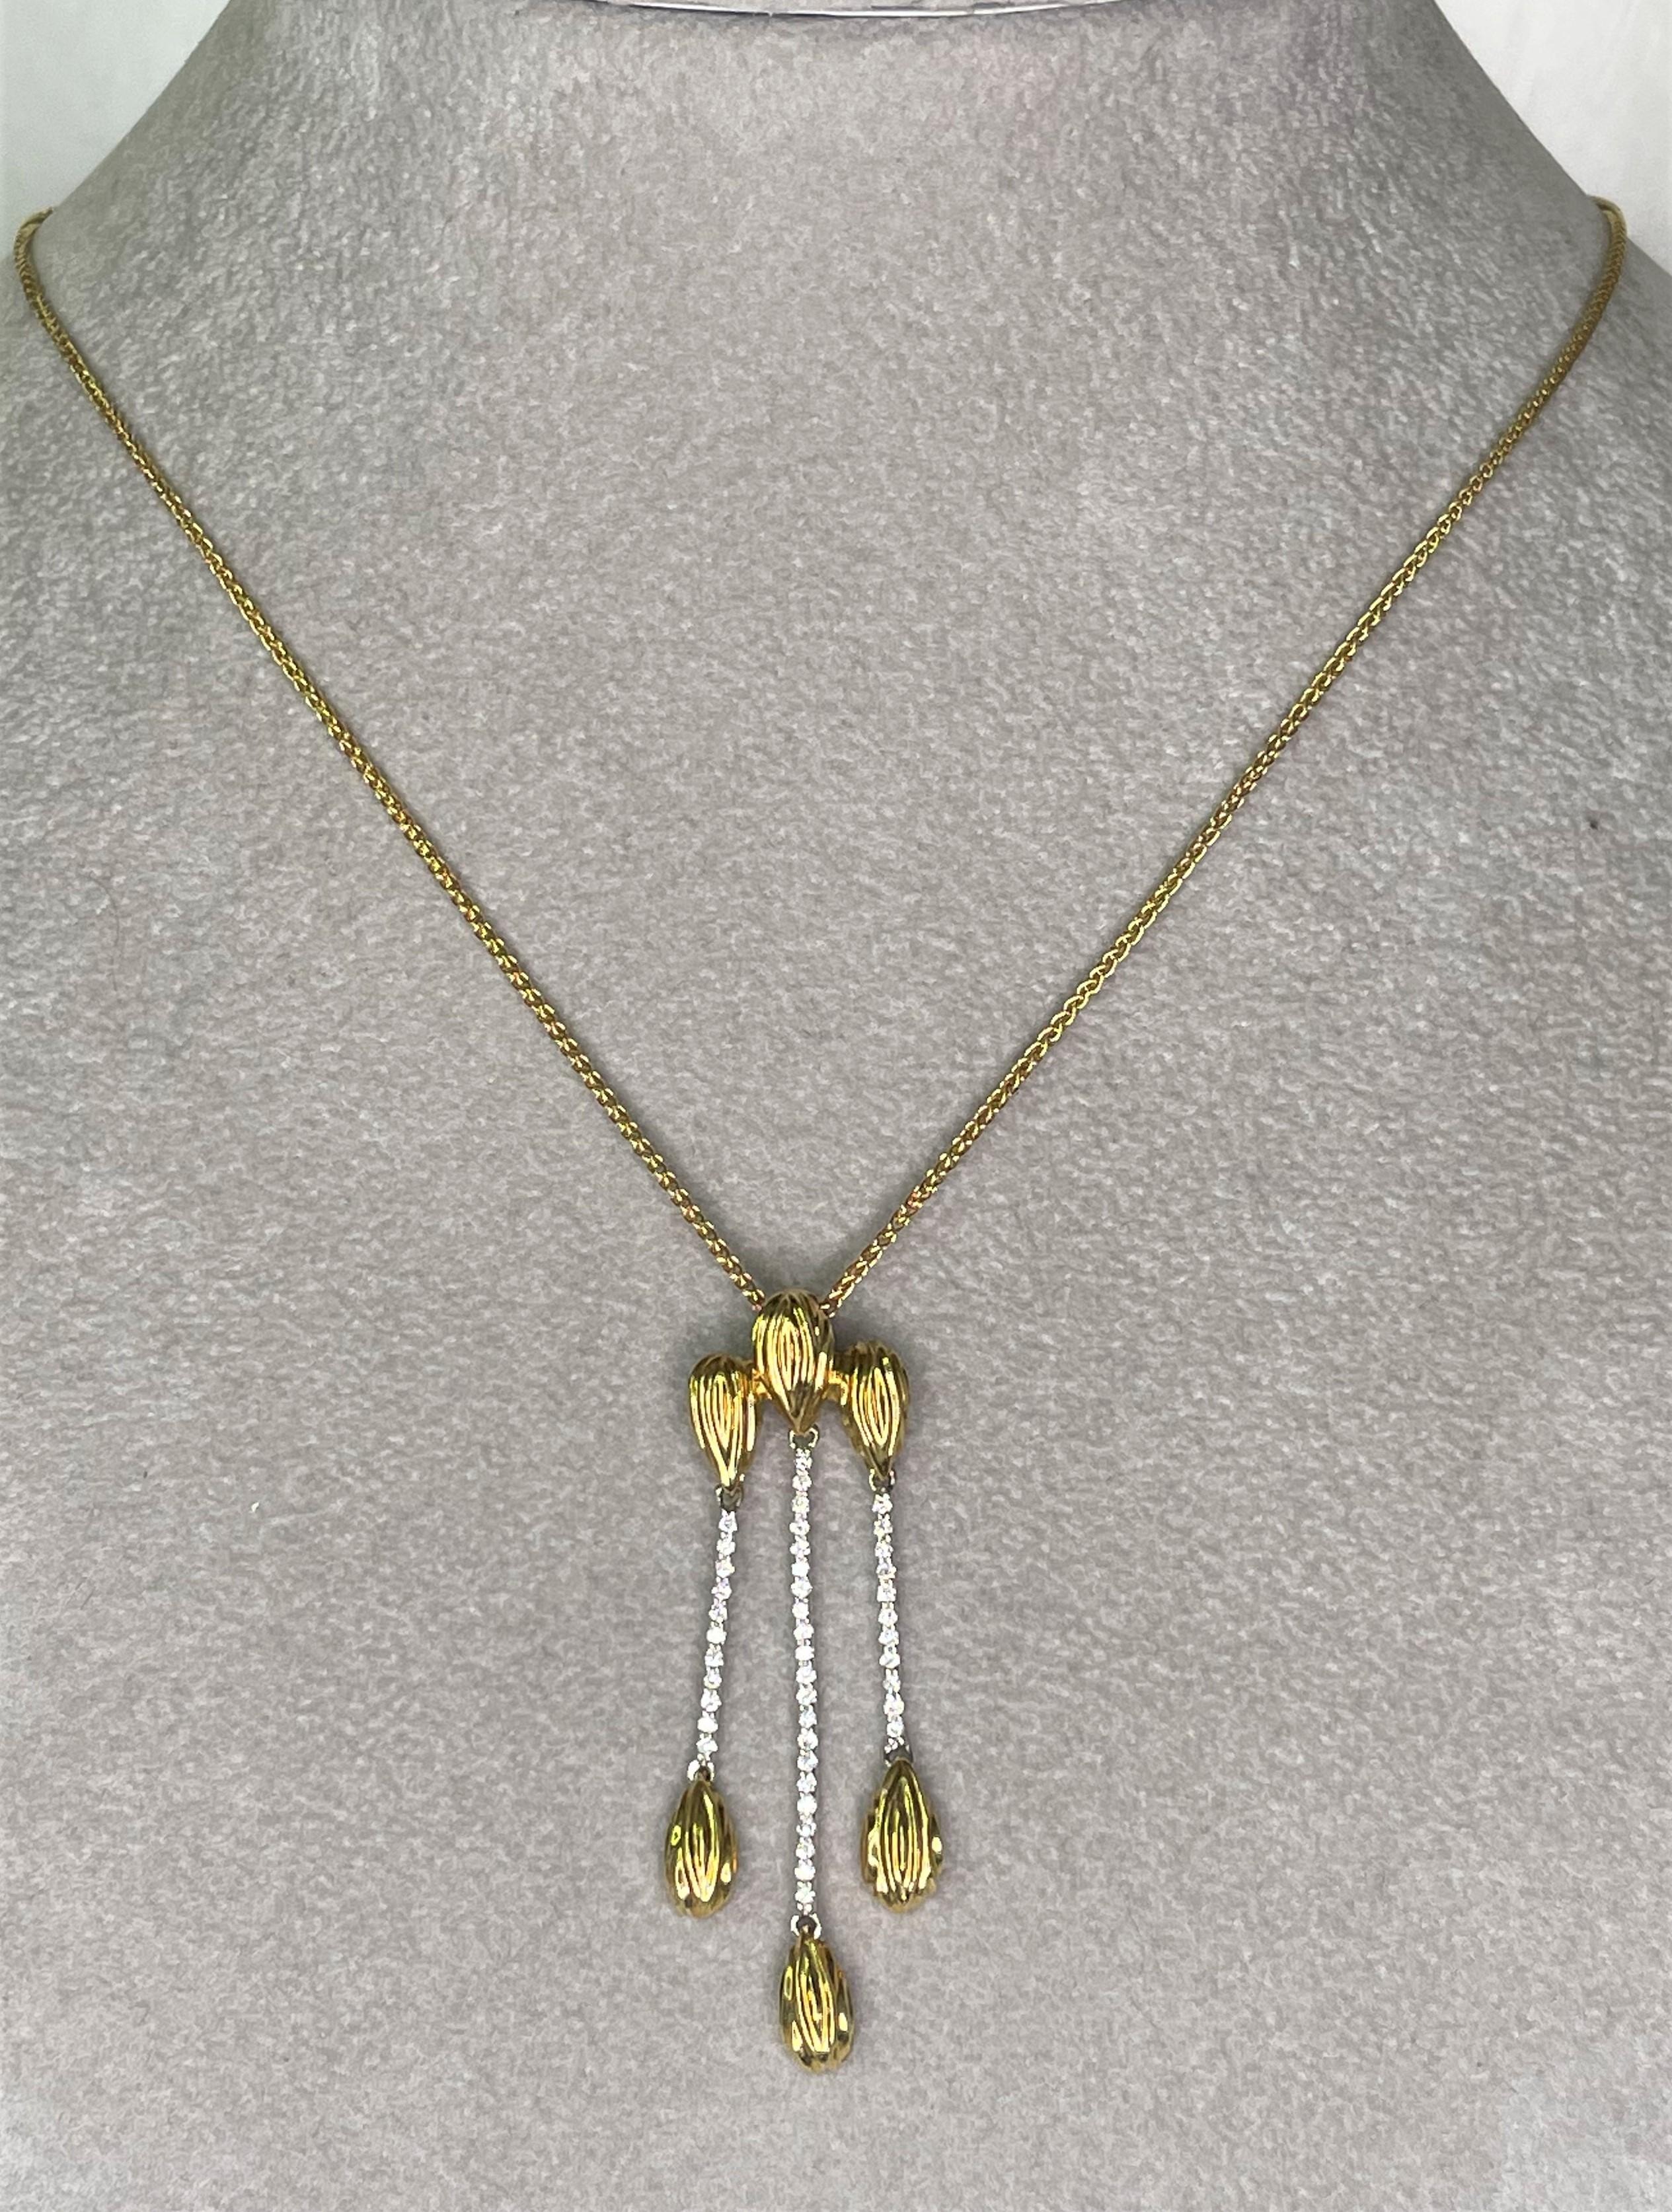 This necklace by Spark Creations, is a beautiful easy-to-wear piece that could be dressed up or worn casually!  
18 karat yellow and white gold pendant with three drops, each with a row of diamonds, .31tdw.
Pendant has movement with yellow gold